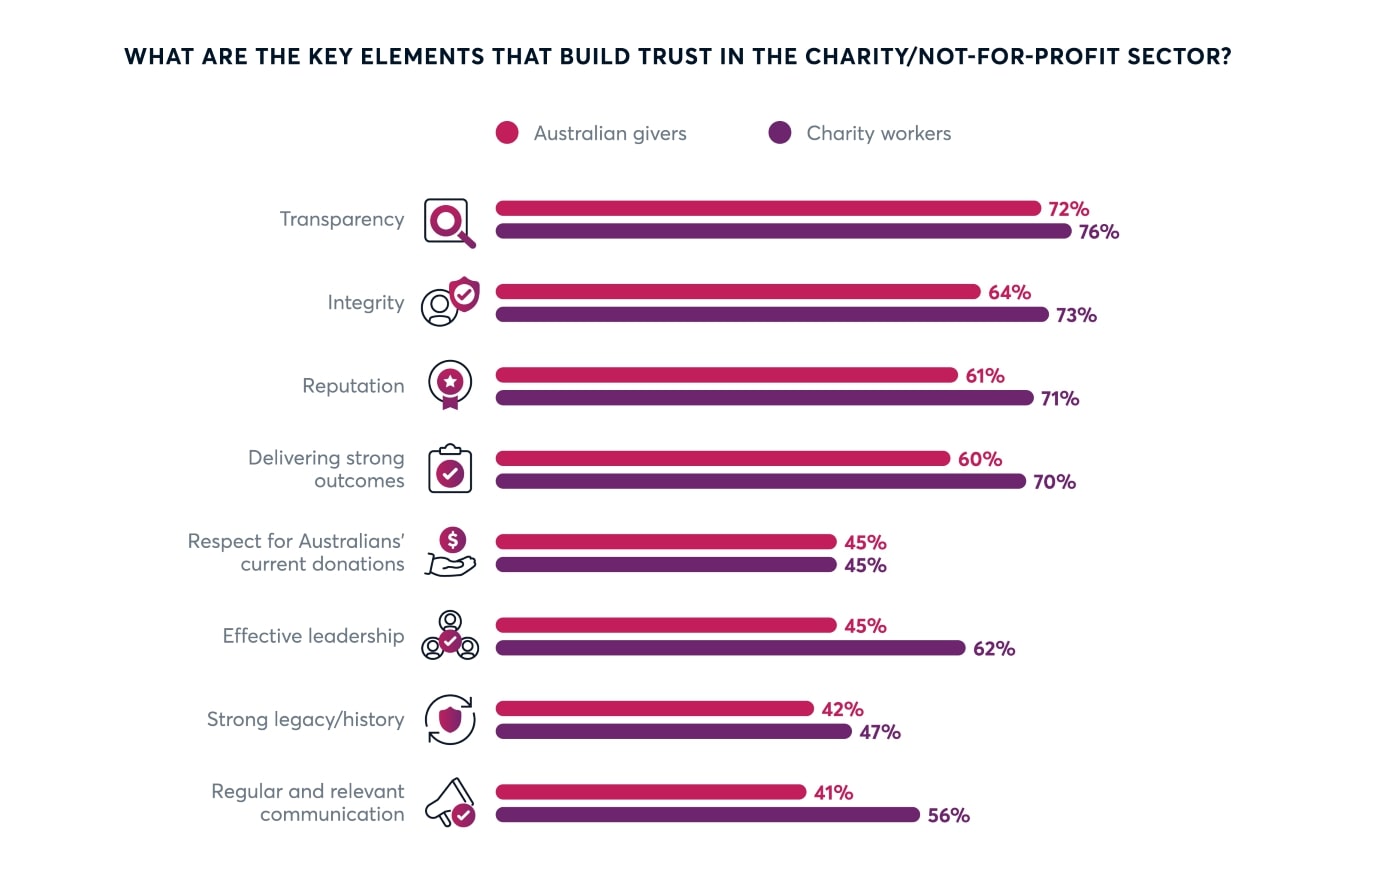 the key elements that build trust in the charity / not for profit sector include transparency, integrity, reputation, delivering strong outcomes, effective leadership, regular and relevant communication, respect for australians' current donations and strong legacy / history.